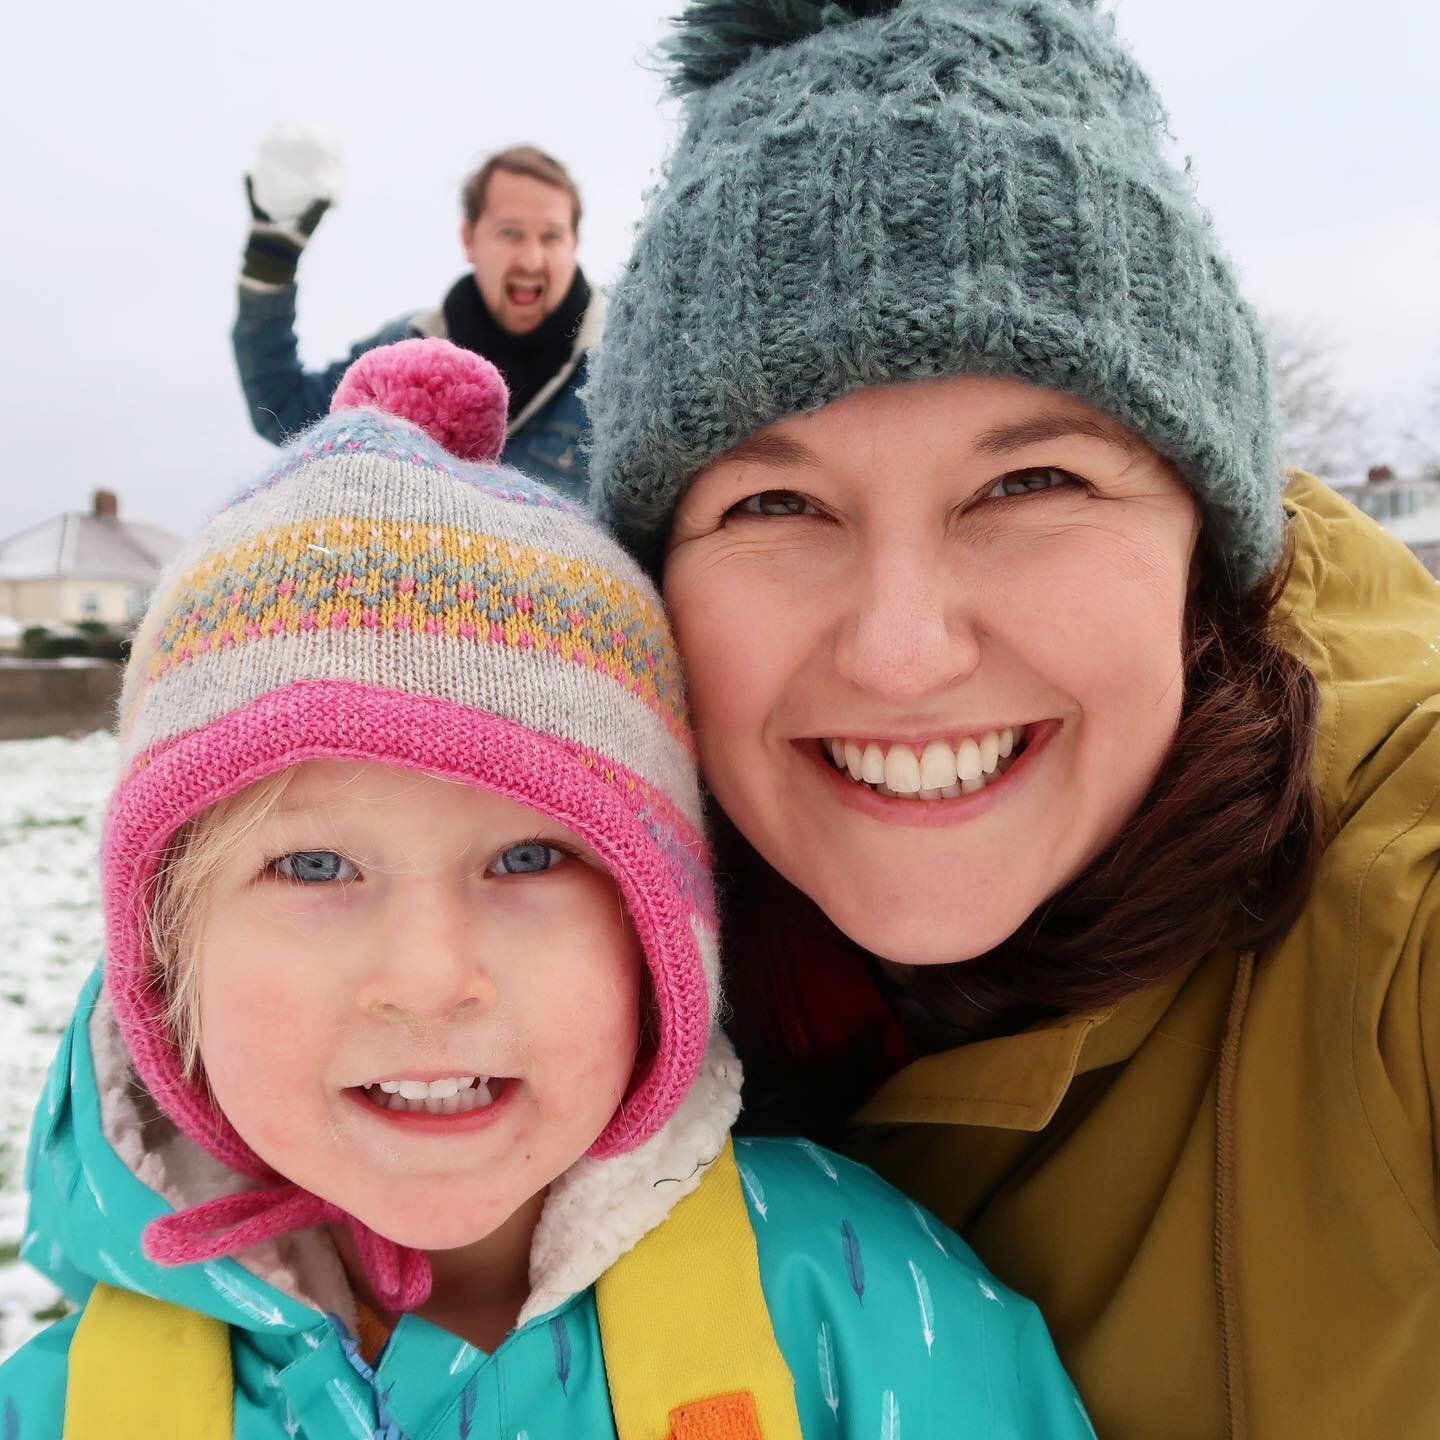 Fun in the snow with my favourites...

I swell with joy when I look at the moments we shared today. 

I don’t know about you but we really needed the snow to bring some extra fun to the weekend. I feel refreshed and clarity has landed. Fresh air and 